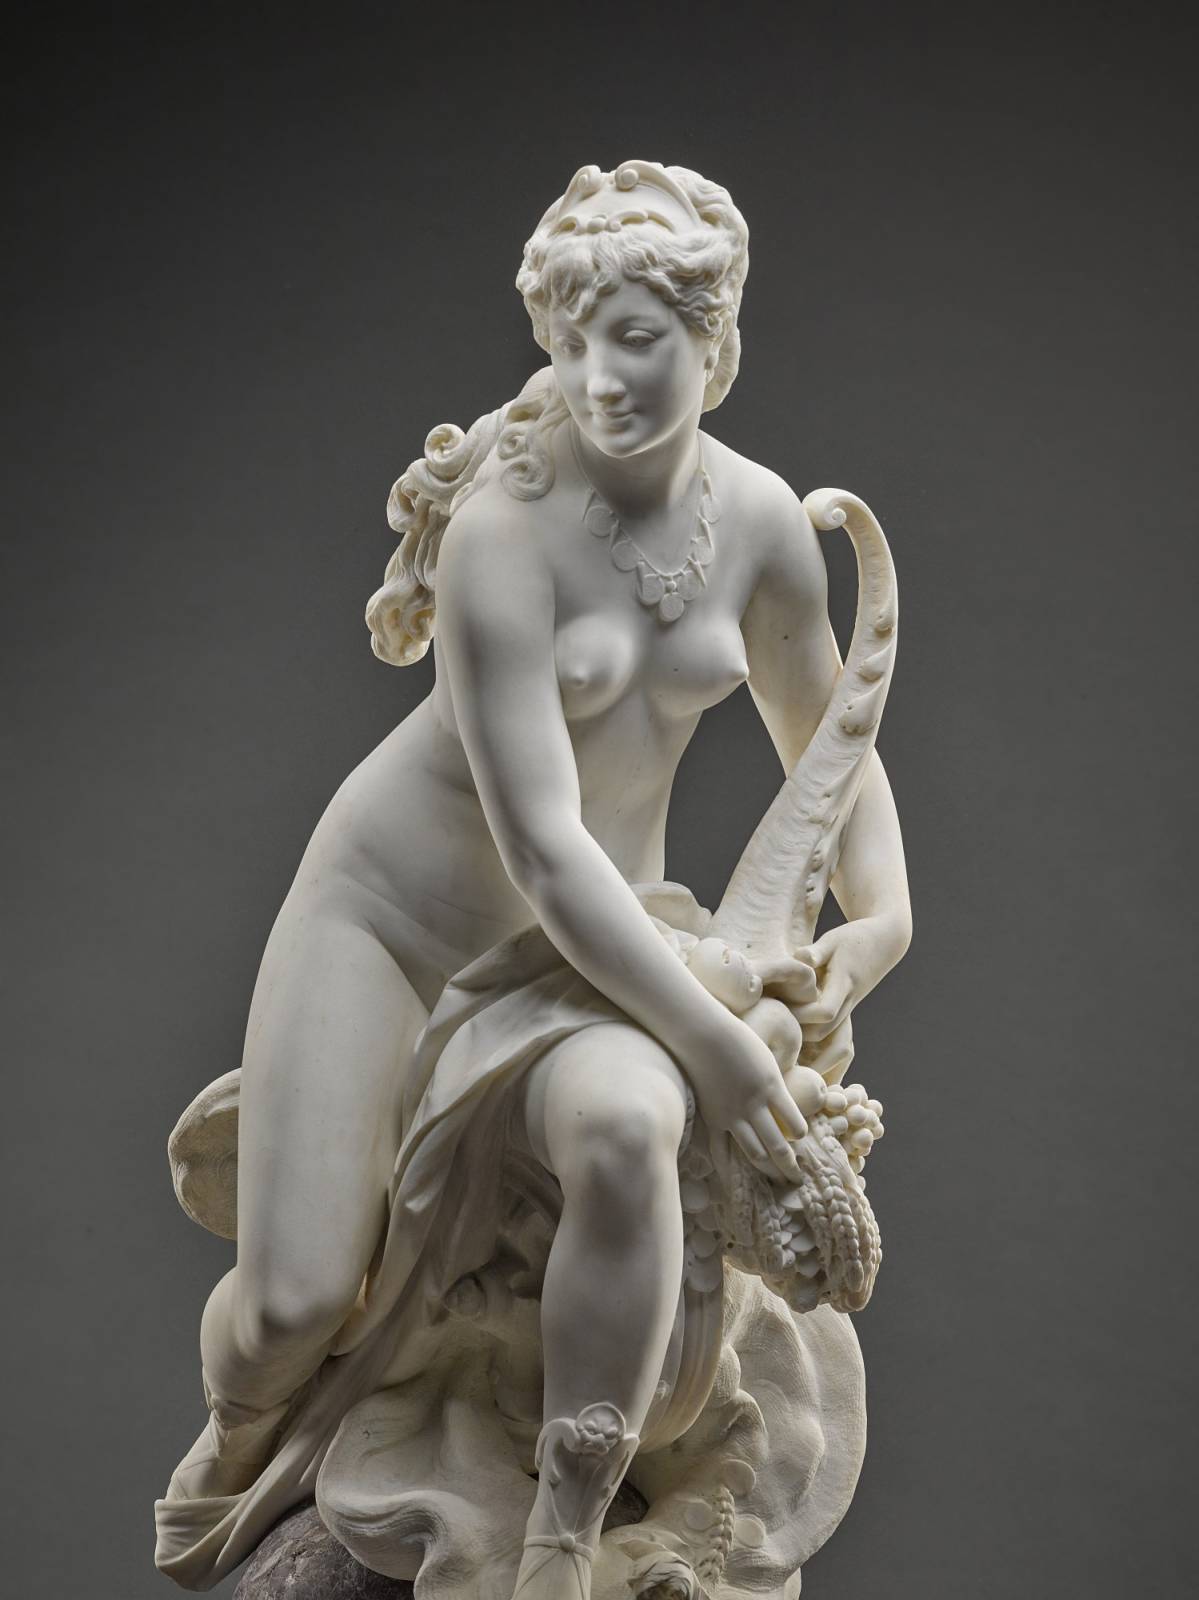 Some beautiful sculpture at a recent Sotheby’s auction